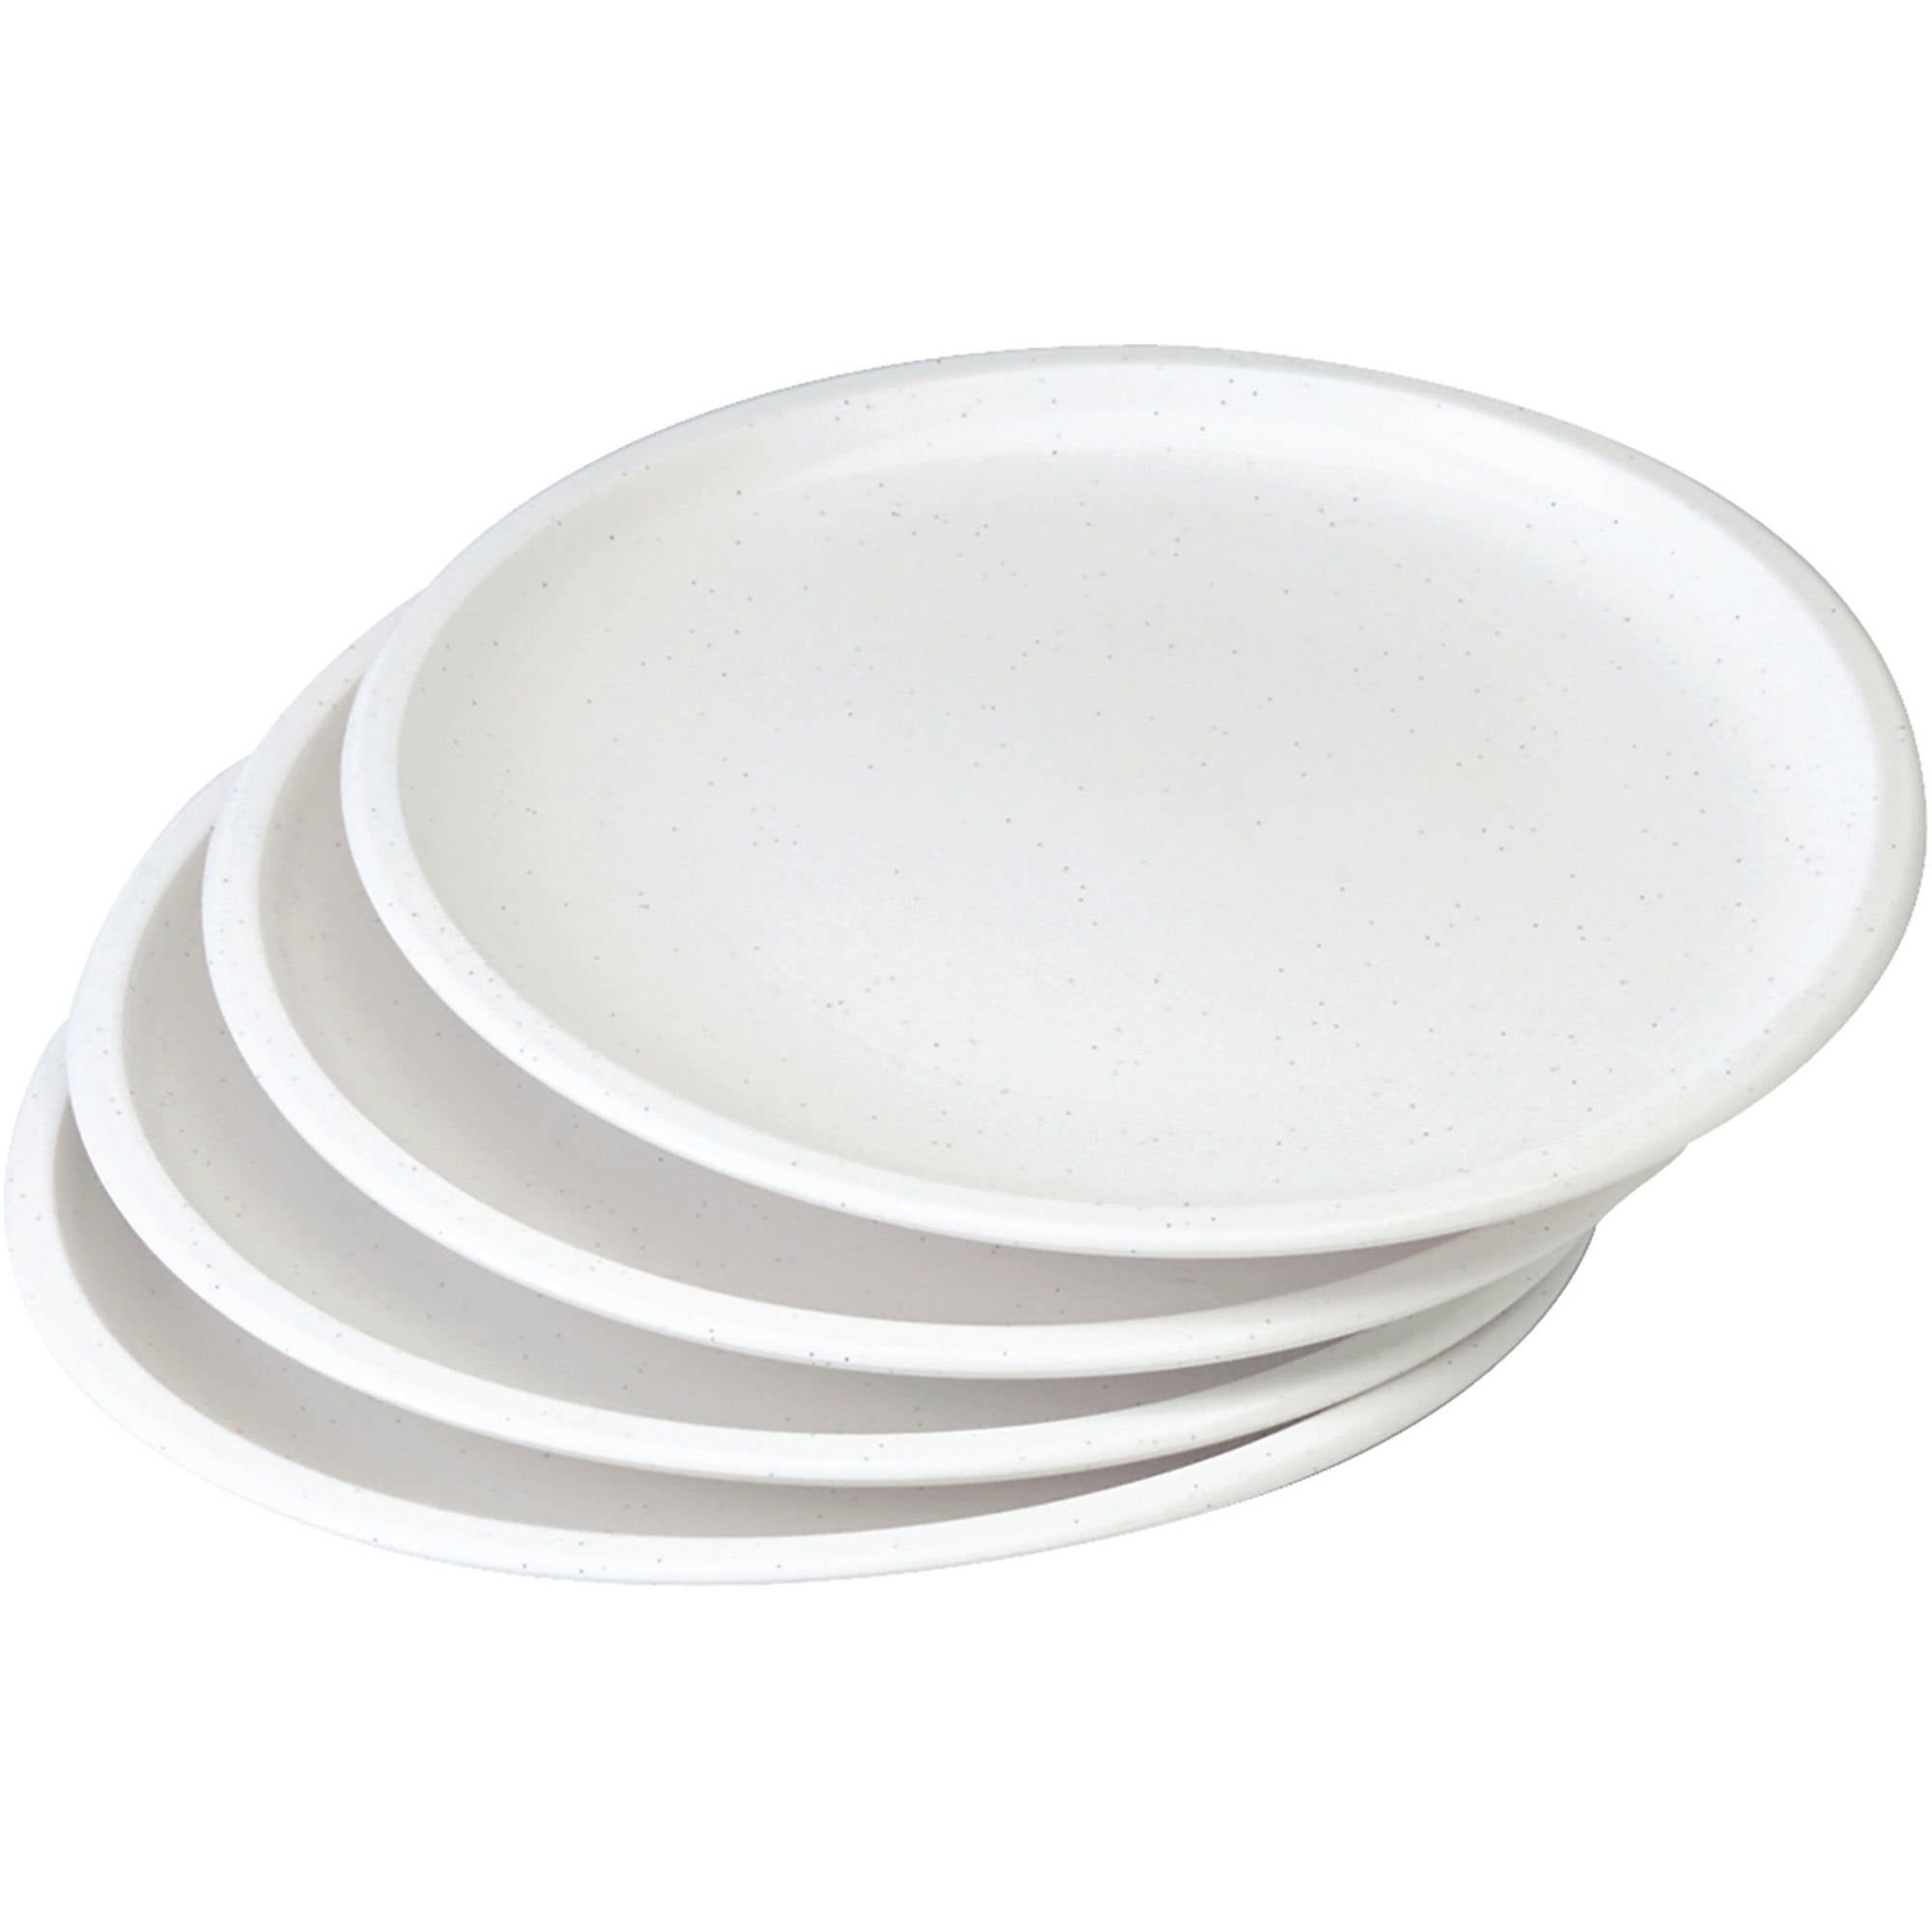 9 ¾ Inches Progressive Prep Solutions Set of 4 Microwave Plates